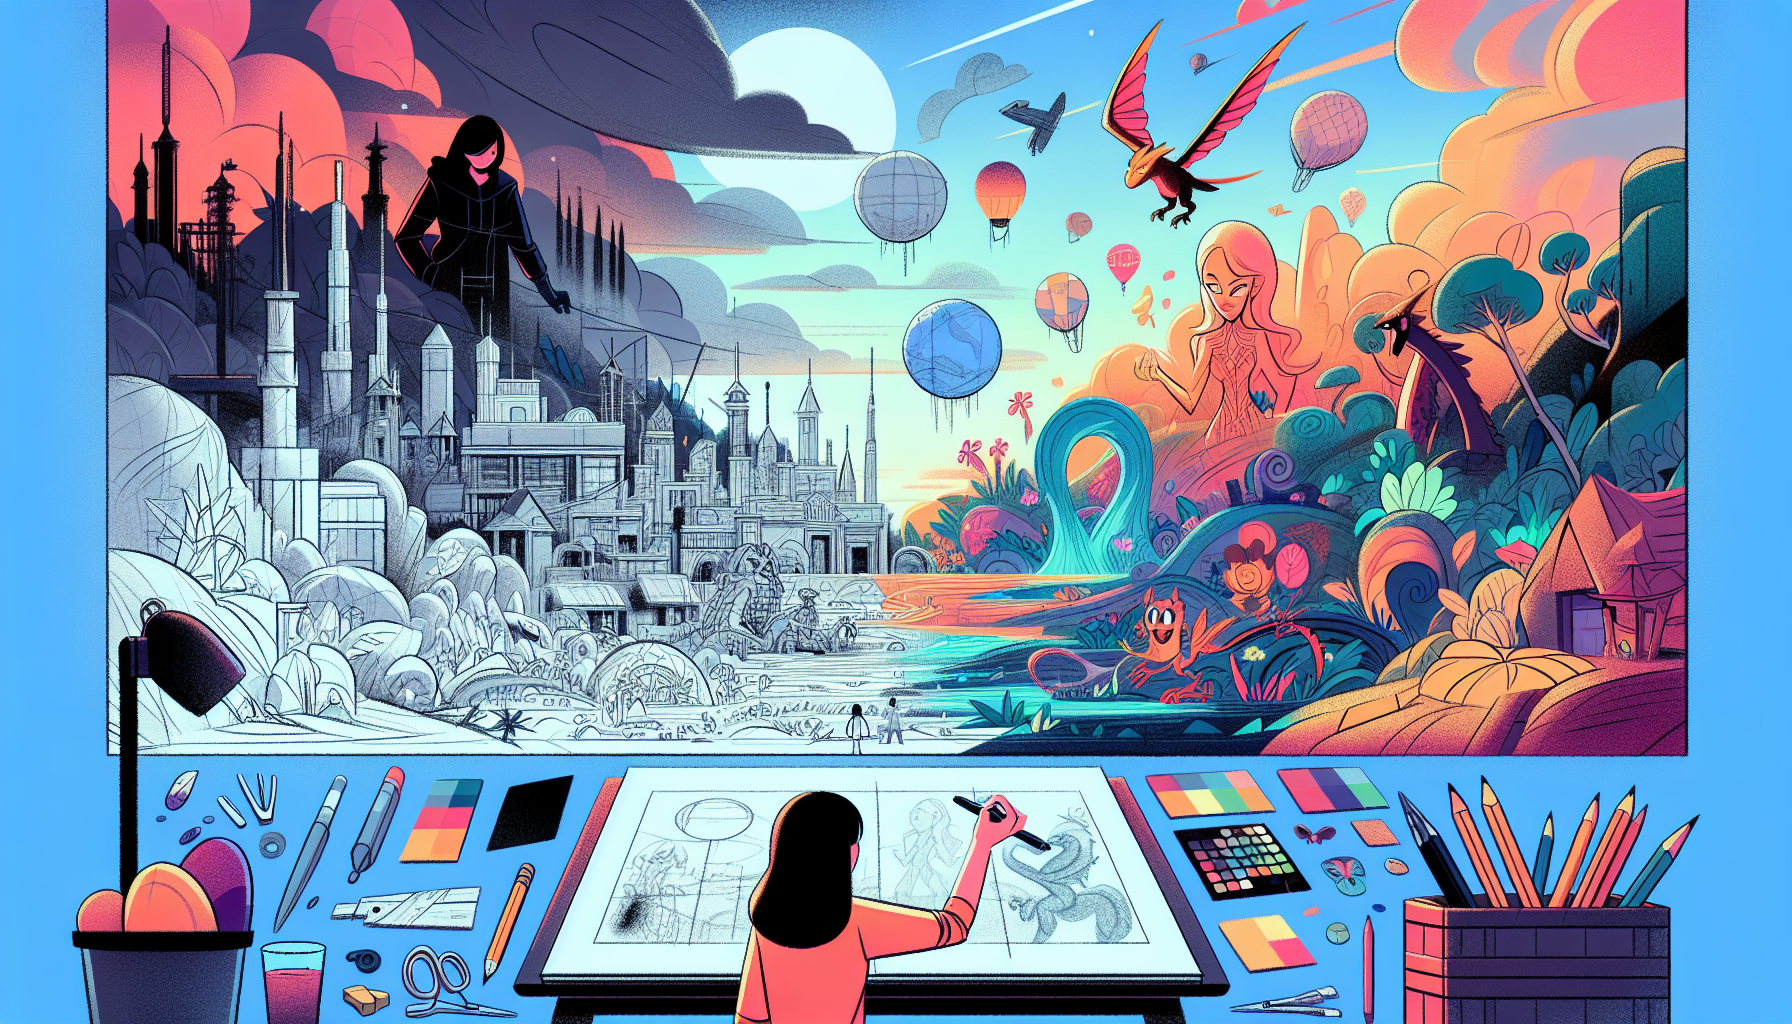 A visual representation of the importance of world-building in animated movies. The scene includes a person showing the progress of a rough sketch transforming into a detailed and vibrant world, showcasing various elements such as buildings, landscapes, and creatures. The person is an Asian woman, as a nod to the importance of diversity in animation. The color palette used should be modern and lively, creating a contrast between the simple, abstract rough sketches and the finished, detailed, and colorful world. The style should be contemporary, without mimicking the style of any specific artist or studio.